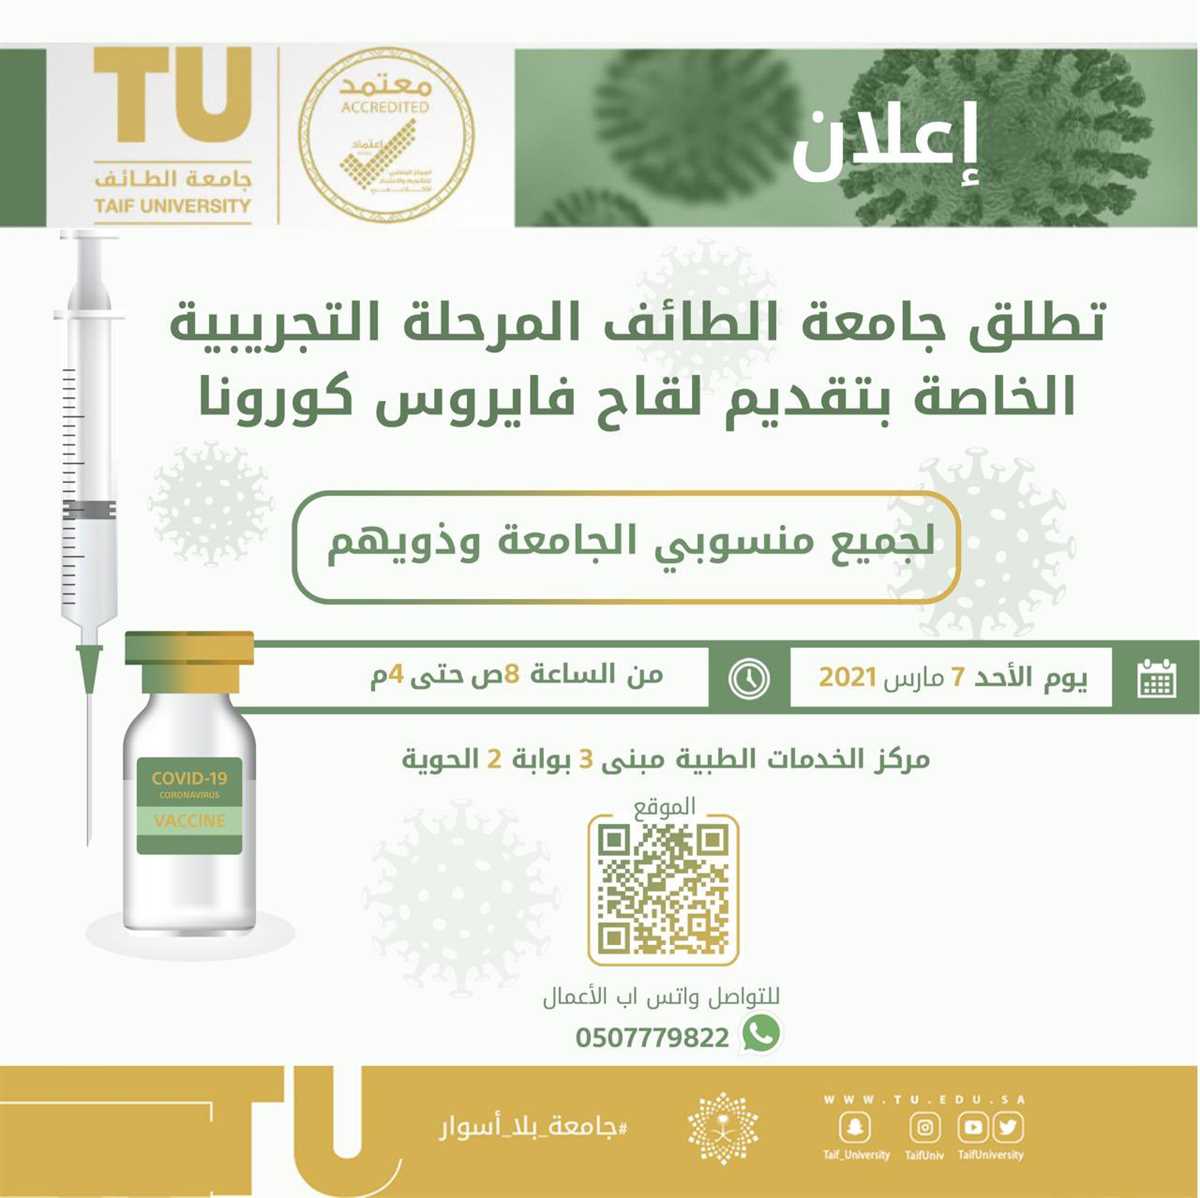 TU provides the Corona virus vaccine to its employees and their families